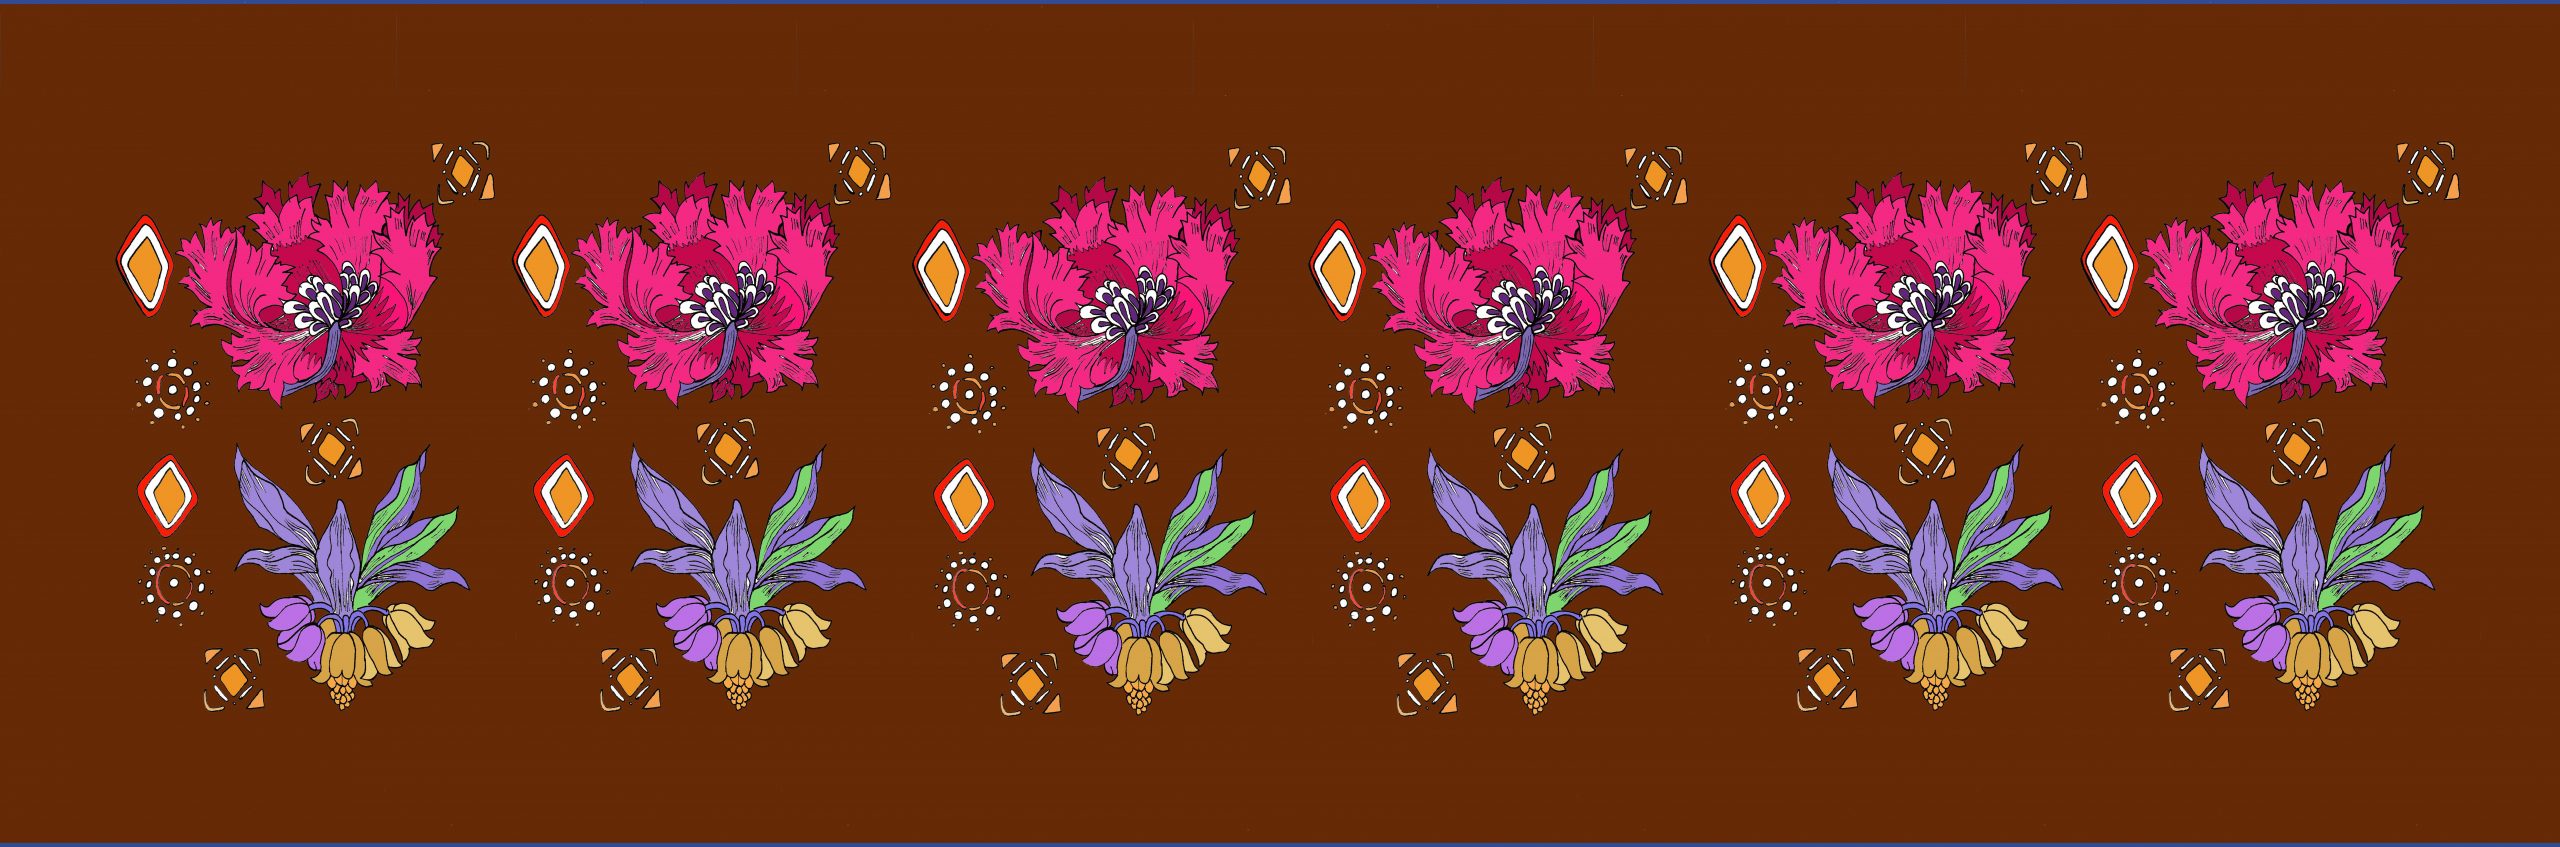 Digital design of pink and purple flowers, geometric shapes against brown background